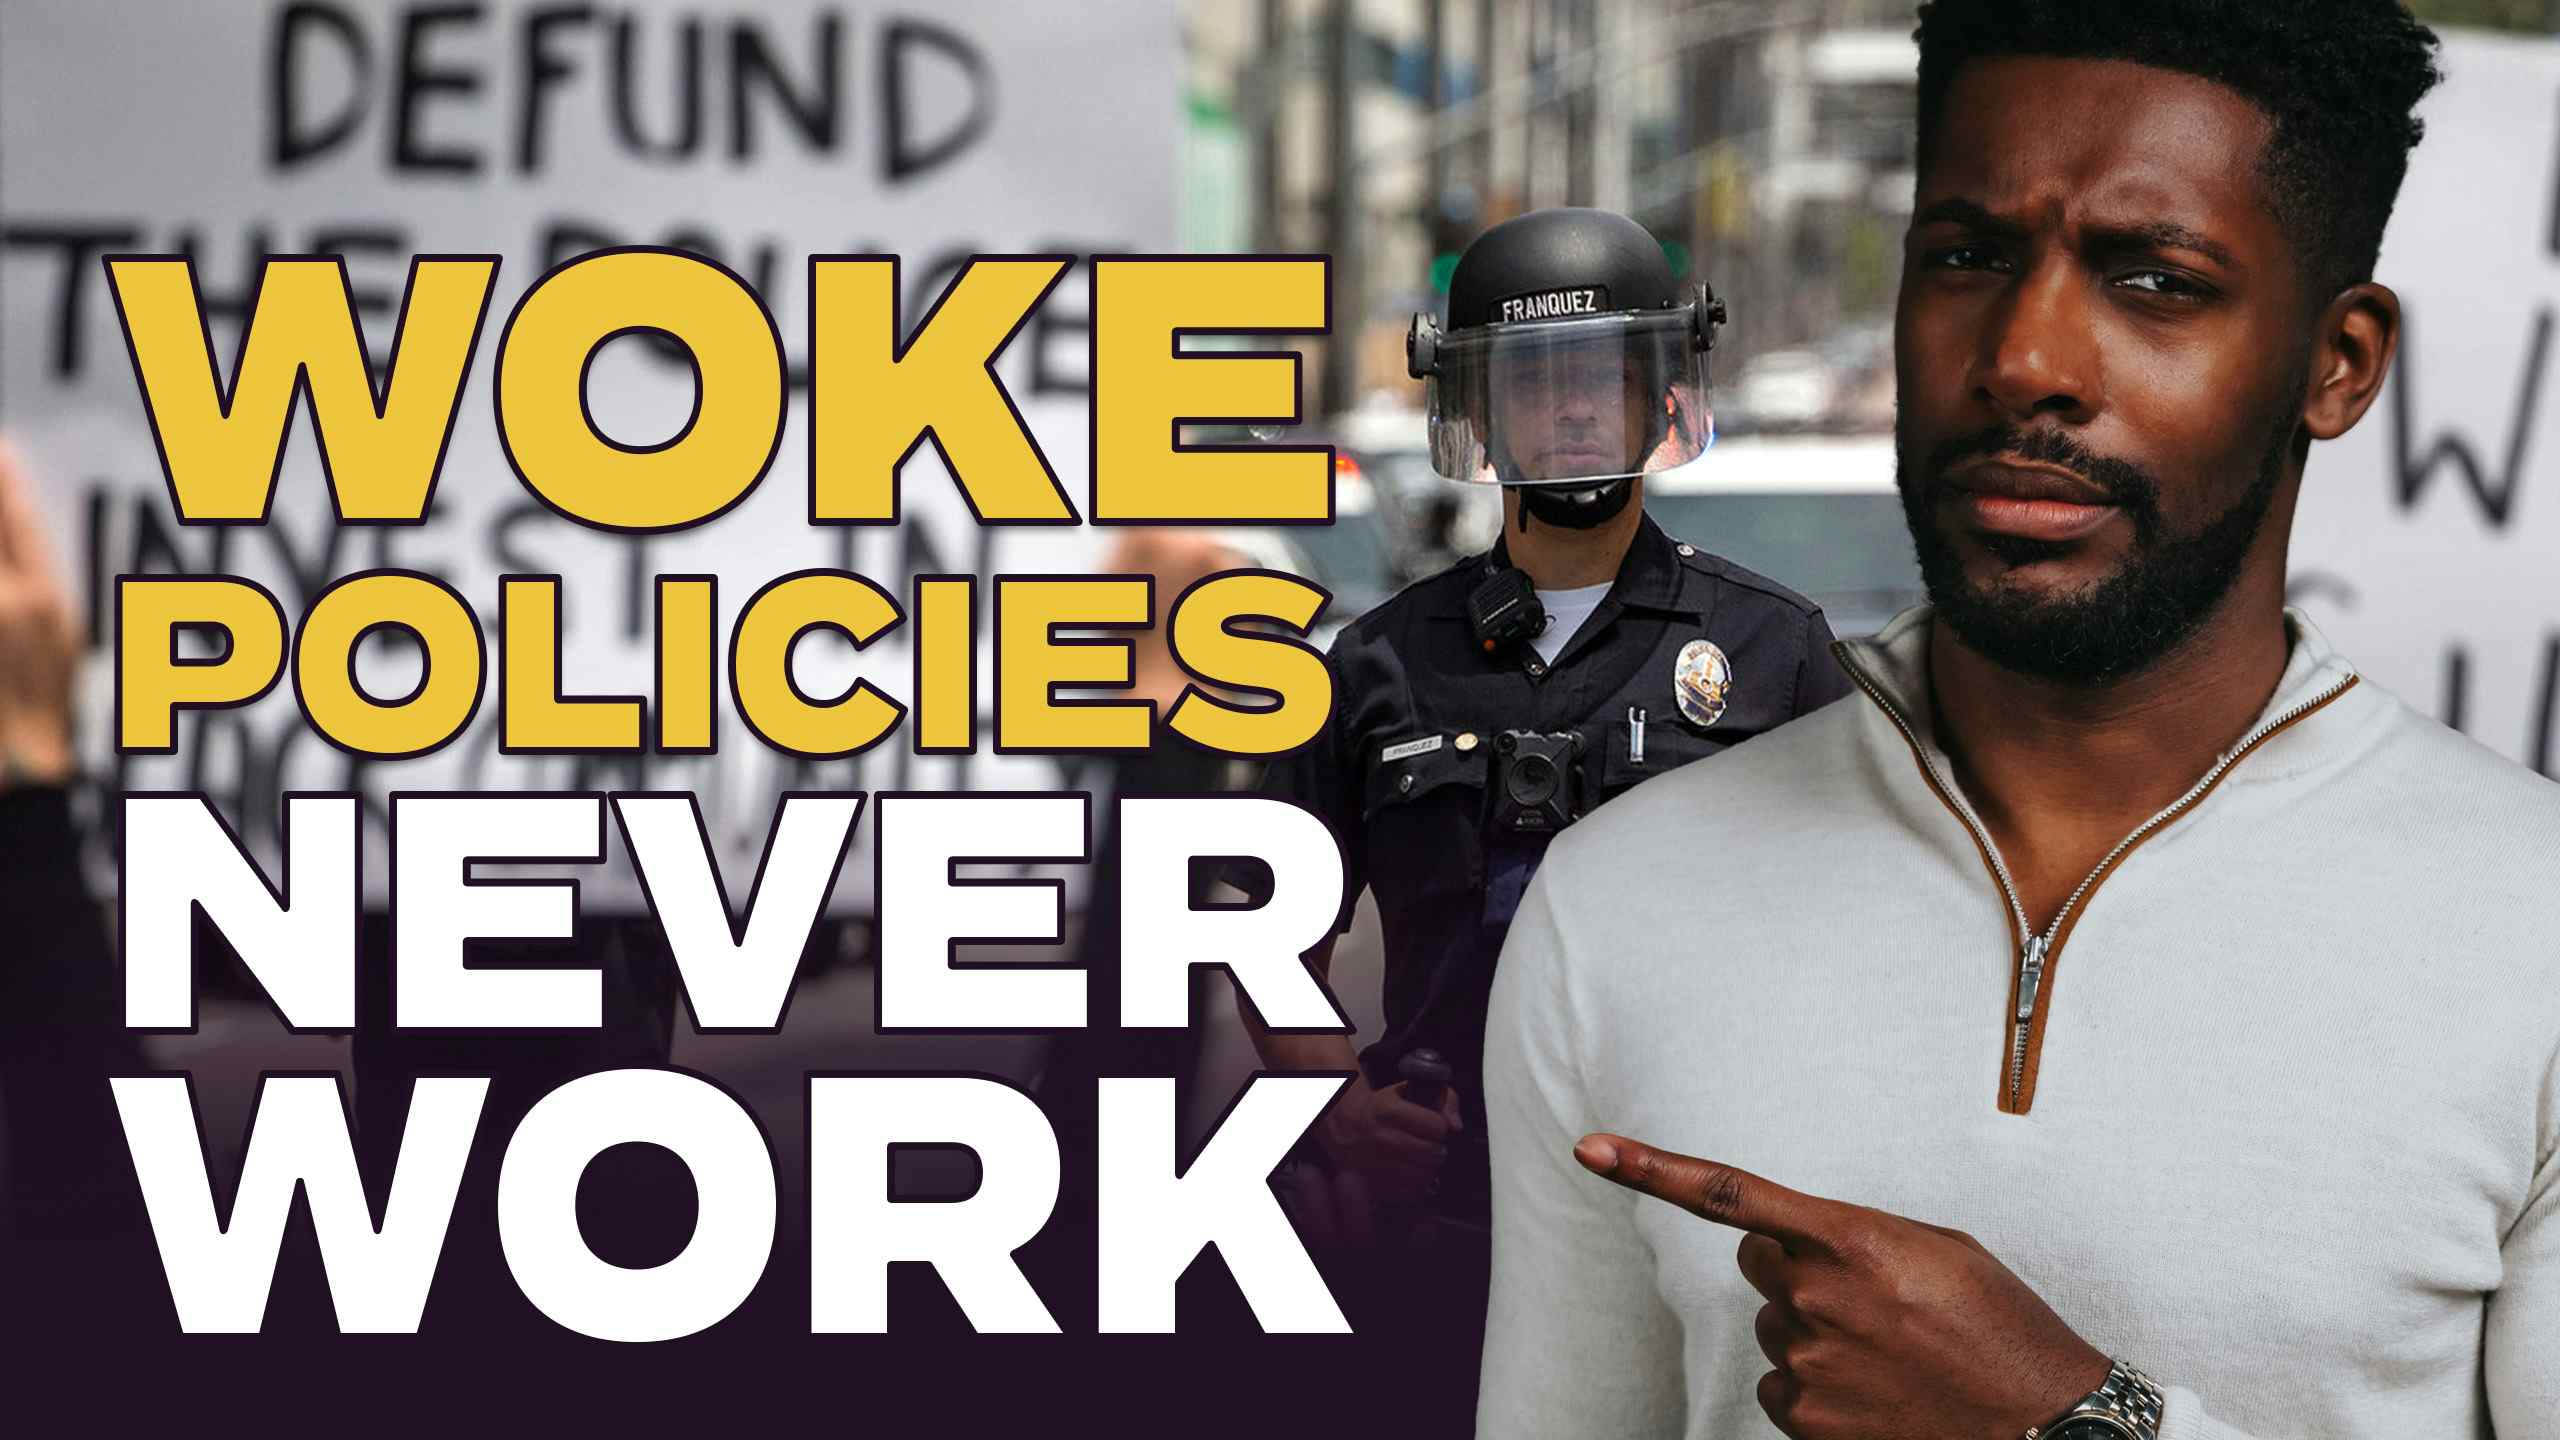 Police Officers Have Been Defunded and Defeated by Woke Policies